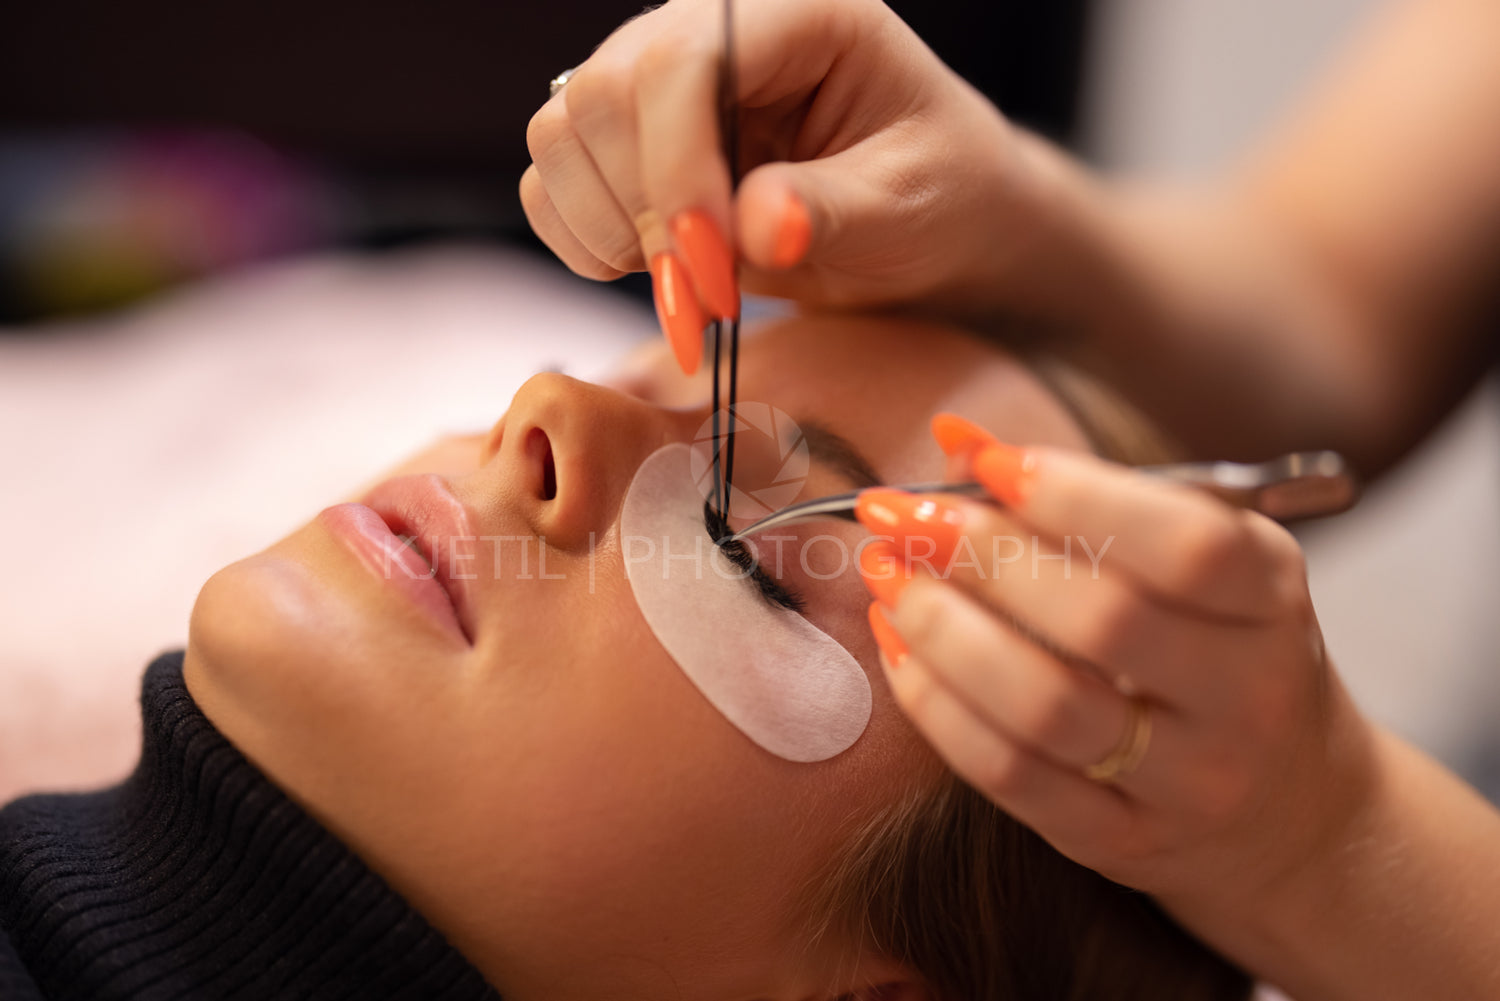 Hands Of Specialist Using Tweezers For Applying False Eyelashes